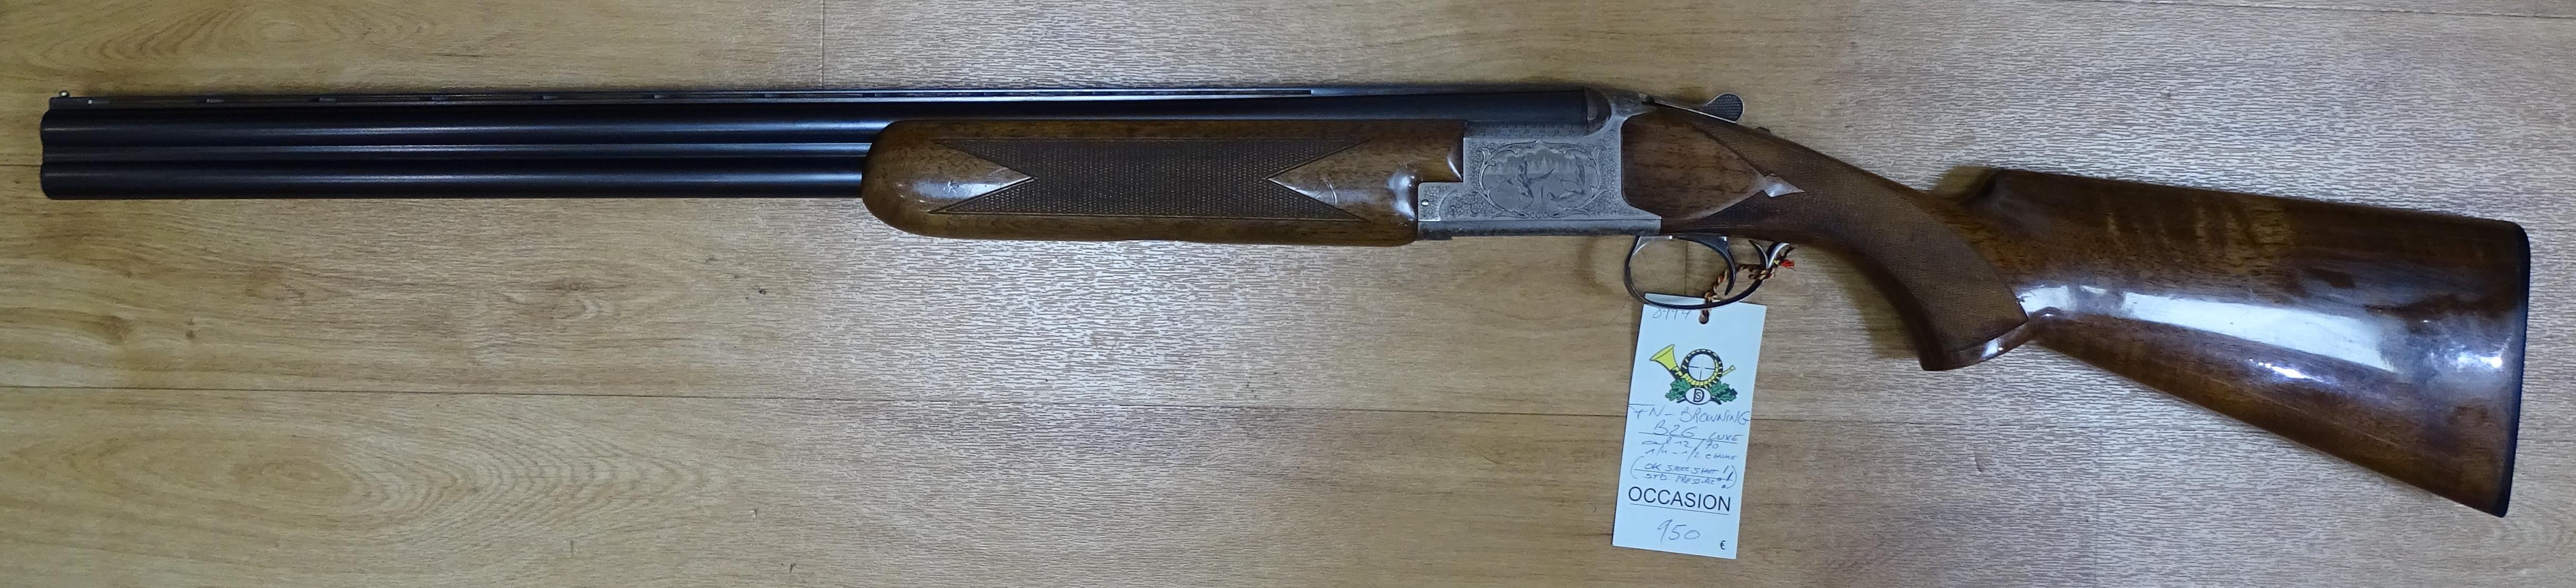 FN - Browning Superpose B26 Luxe